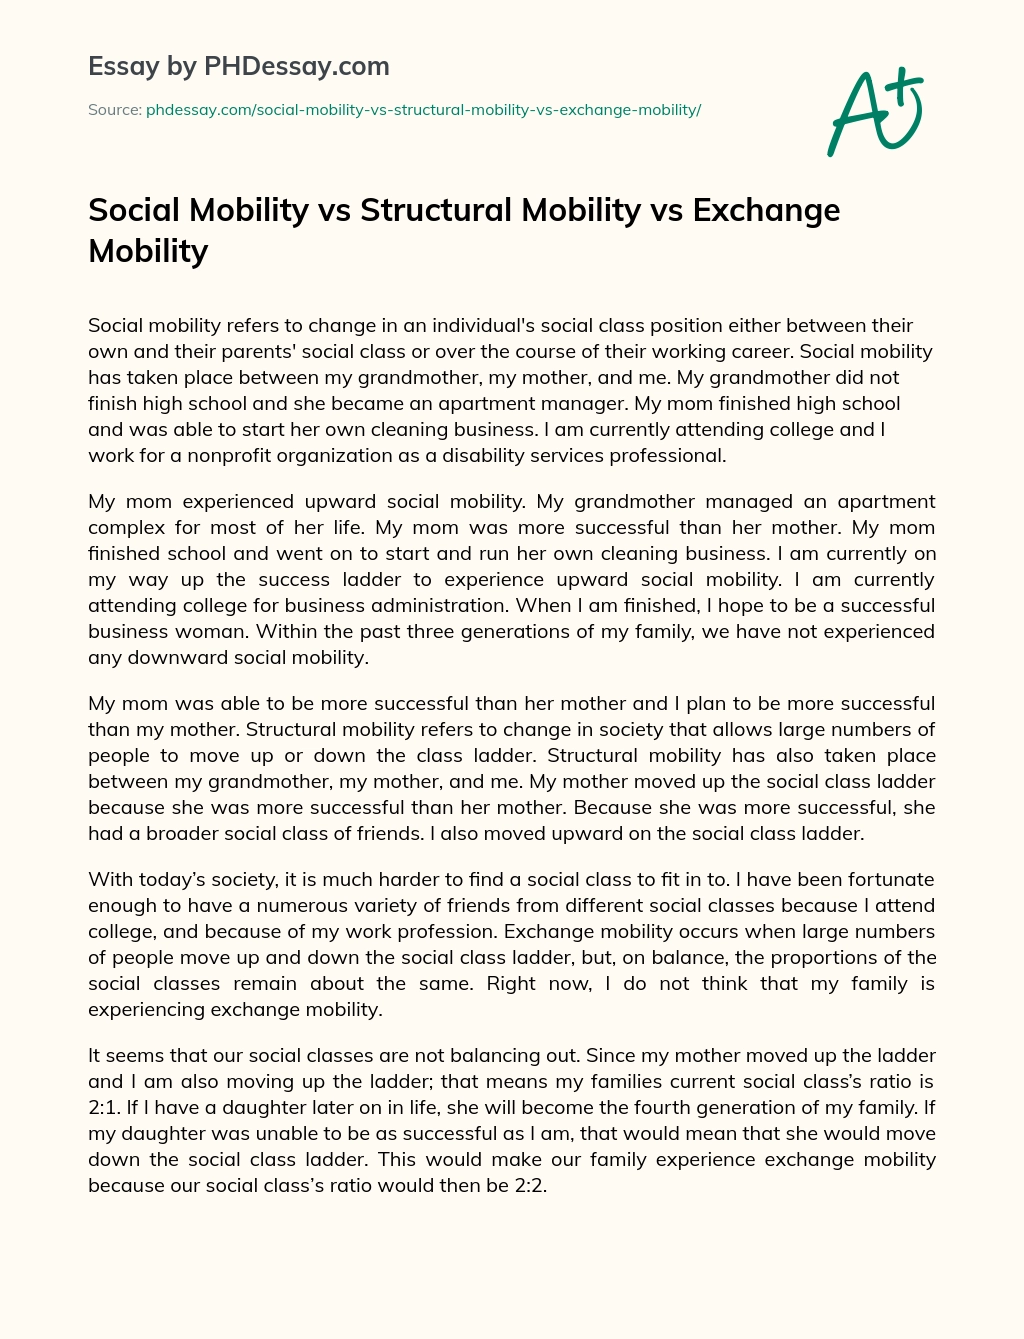 Social Mobility vs Structural Mobility vs Exchange Mobility essay